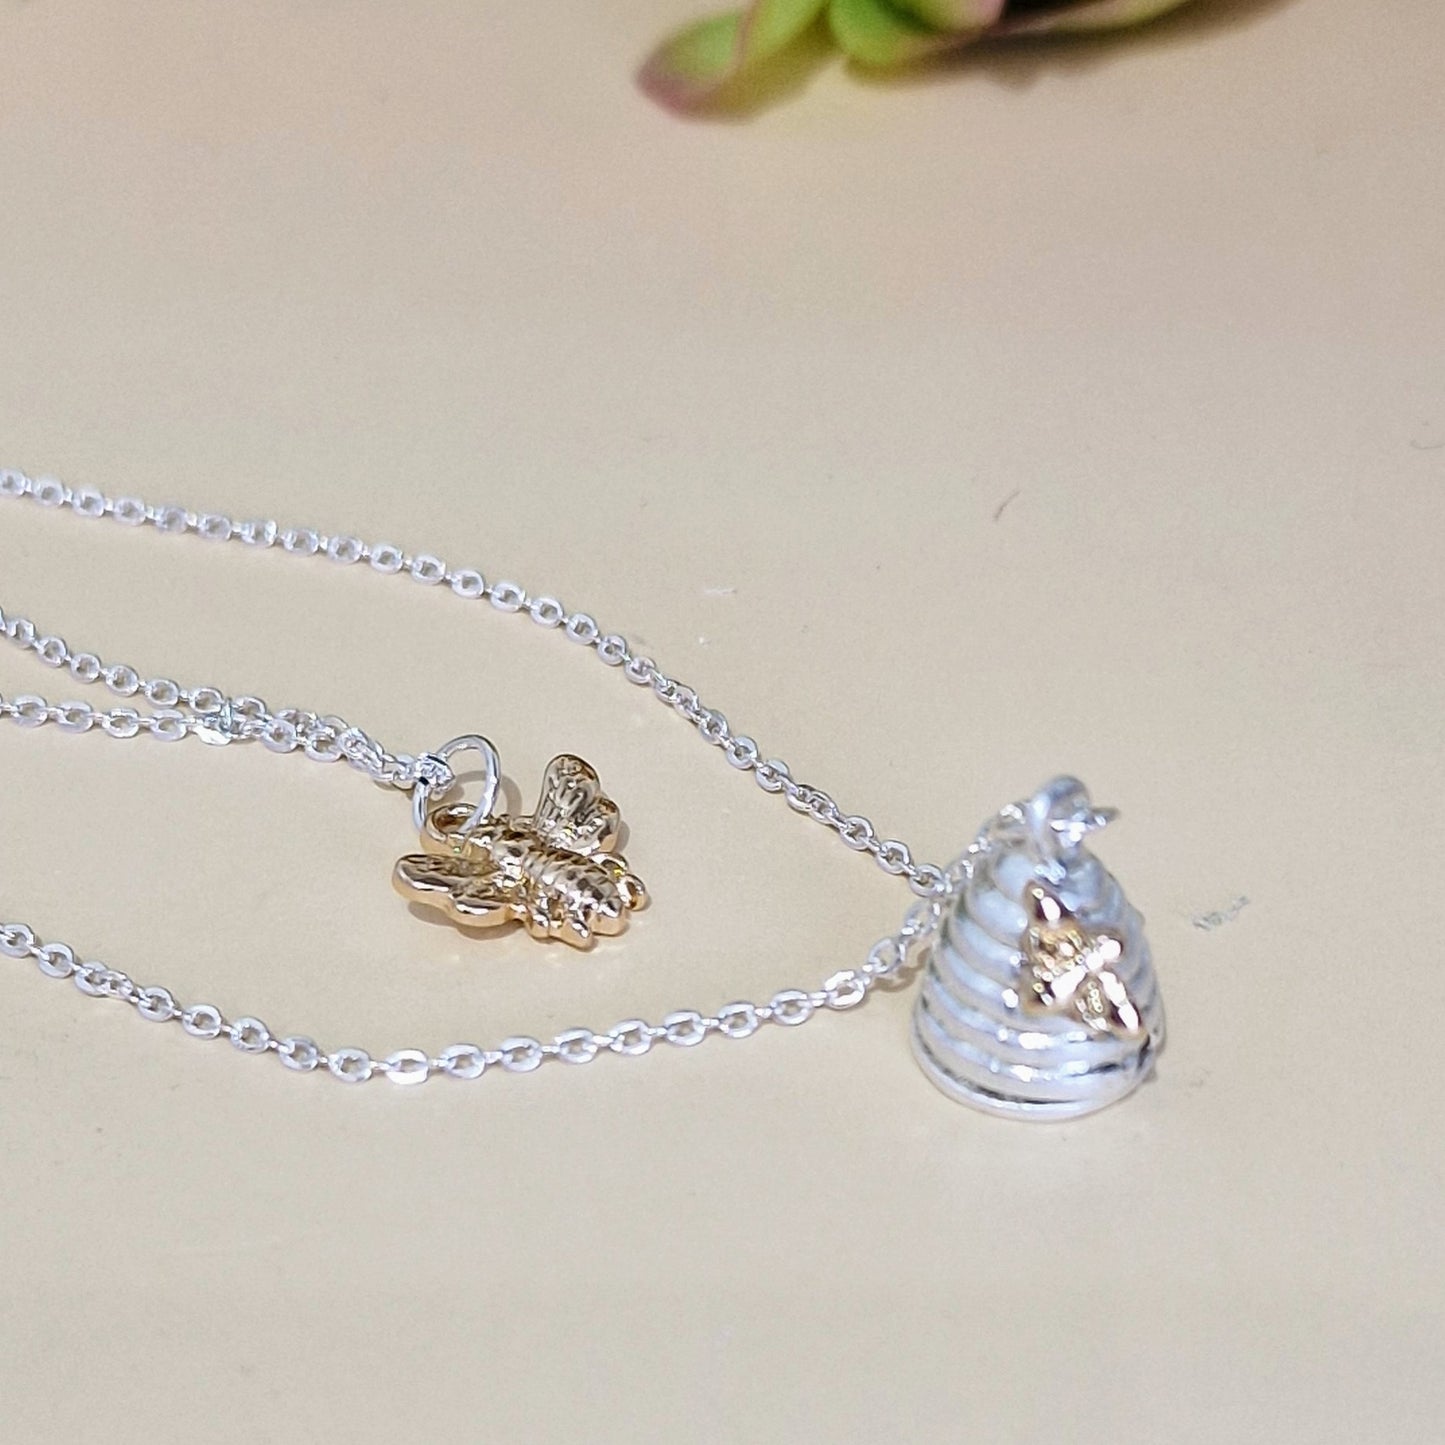 Delicate Layered Honey Bee with Beehive Necklace by POM